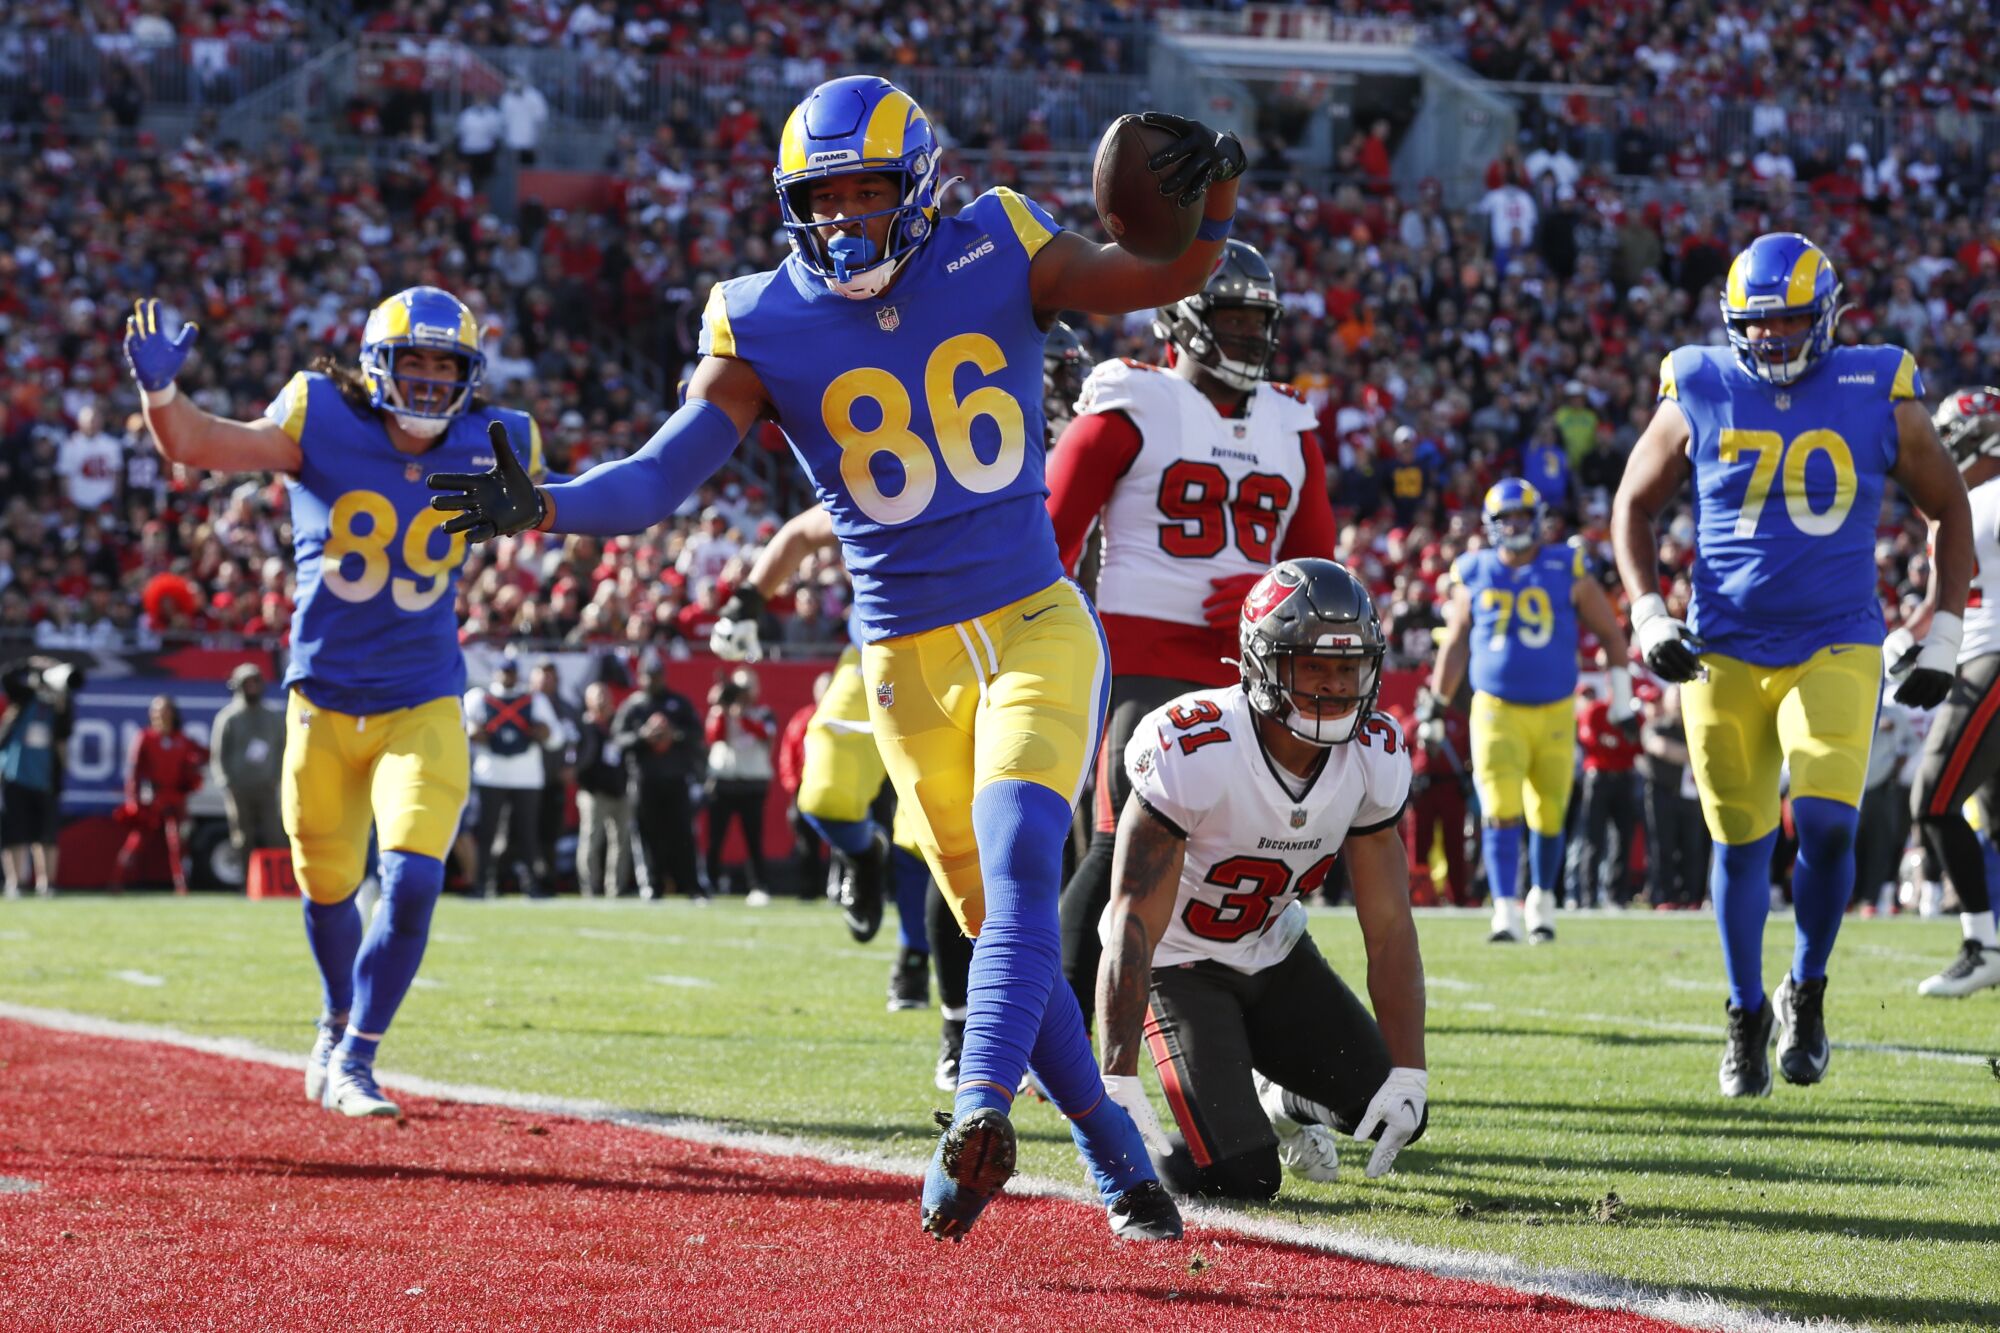 Rams tight end Kendall Blanton scores a first quarter touchdown in front of Buccaneers safety Antoine Winfield Jr.